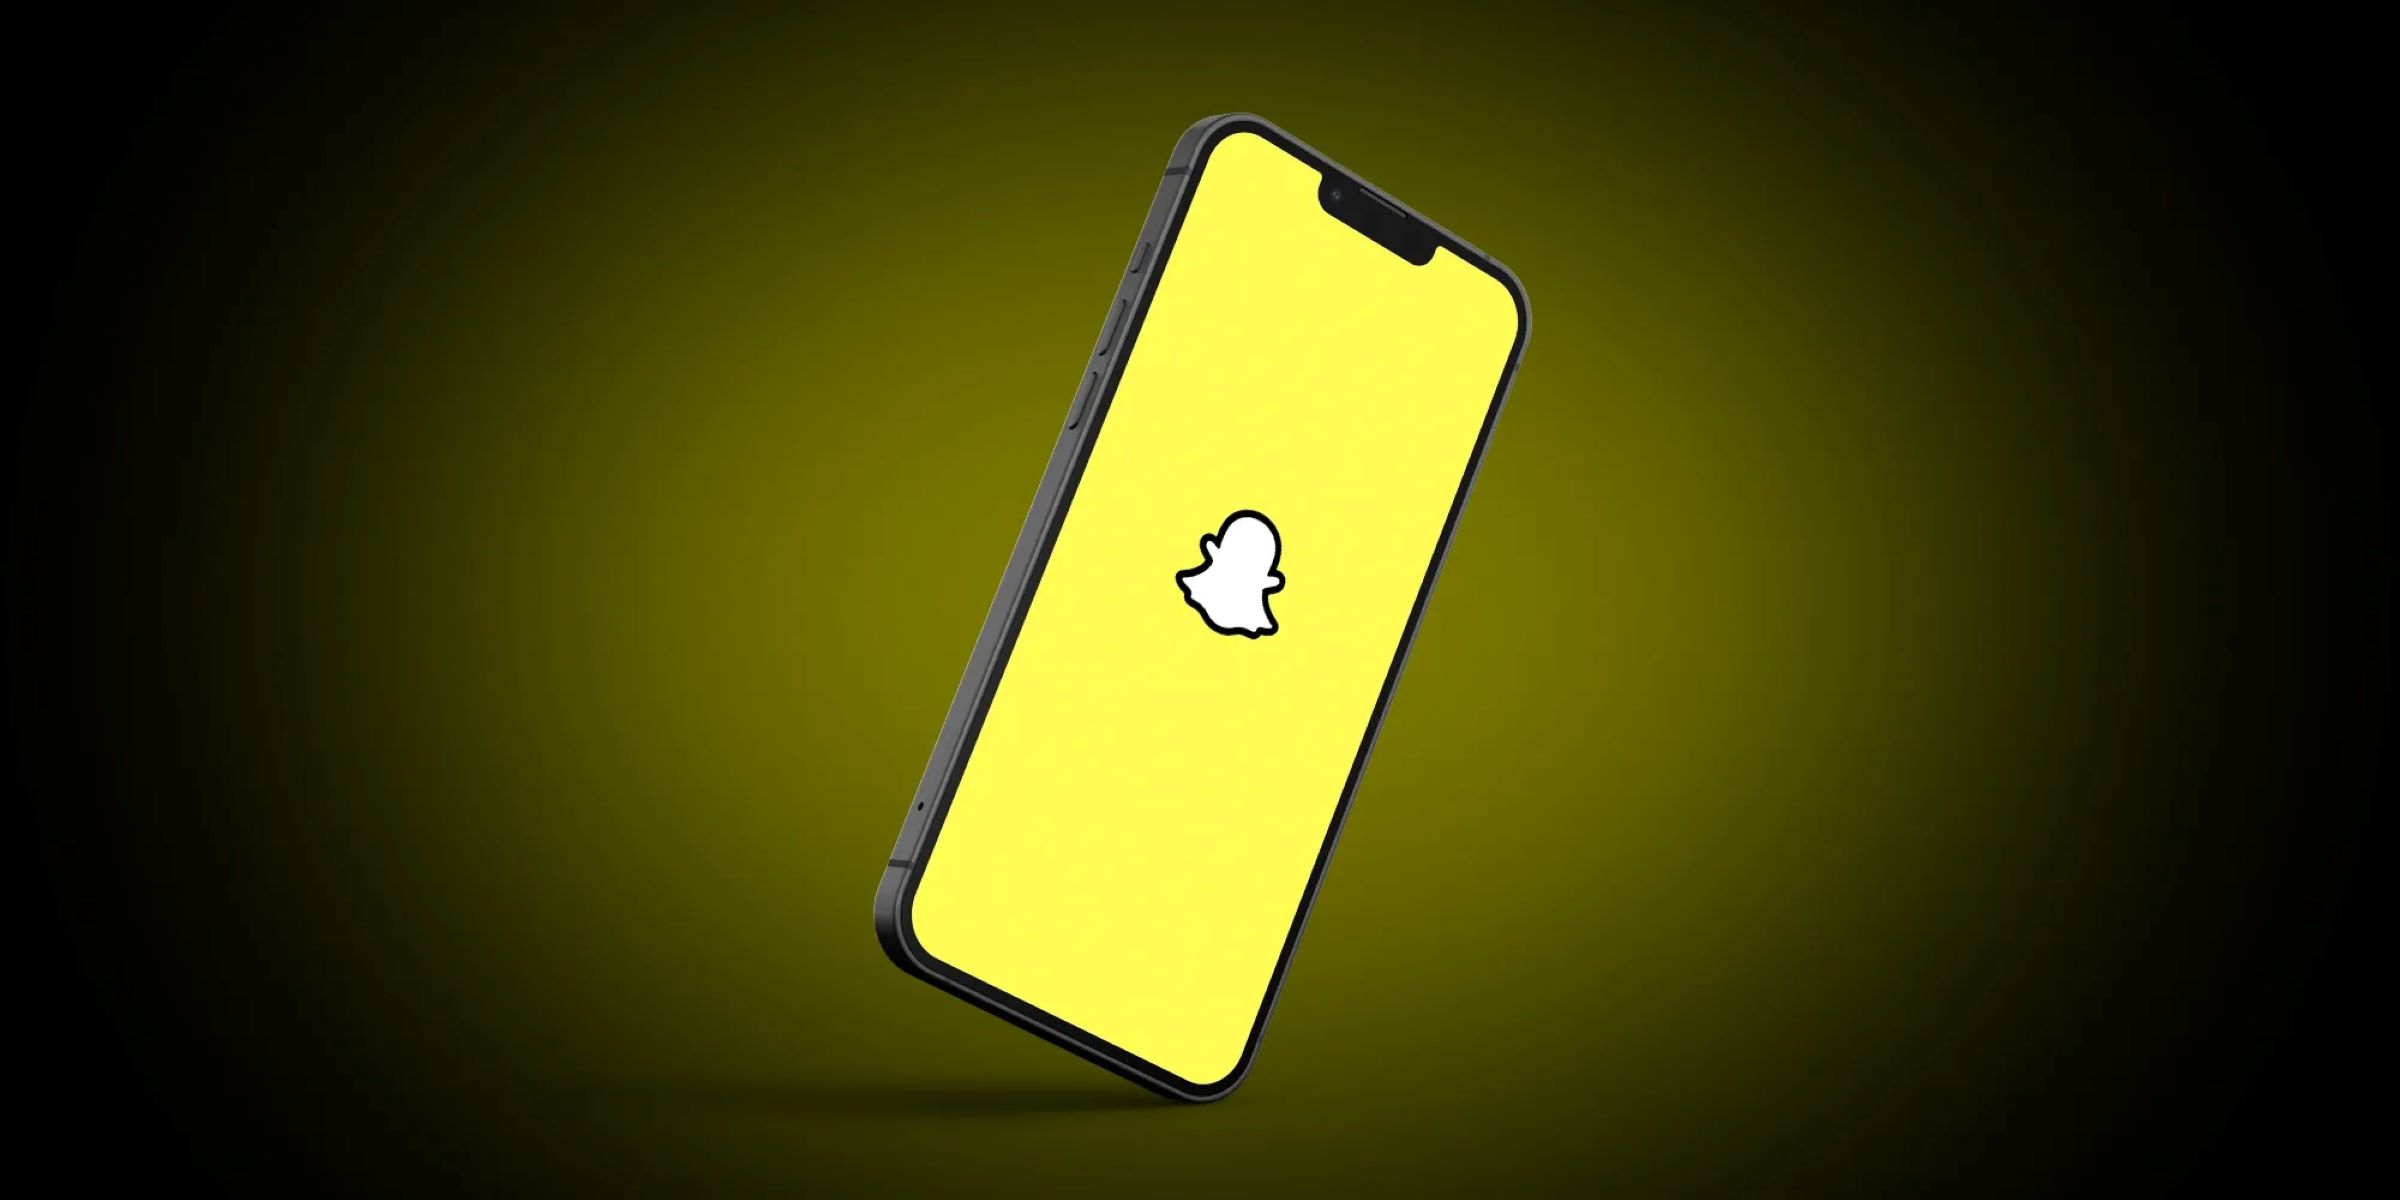 The Ultimate Hack To Know If You’ve Been Blocked On Snapchat!